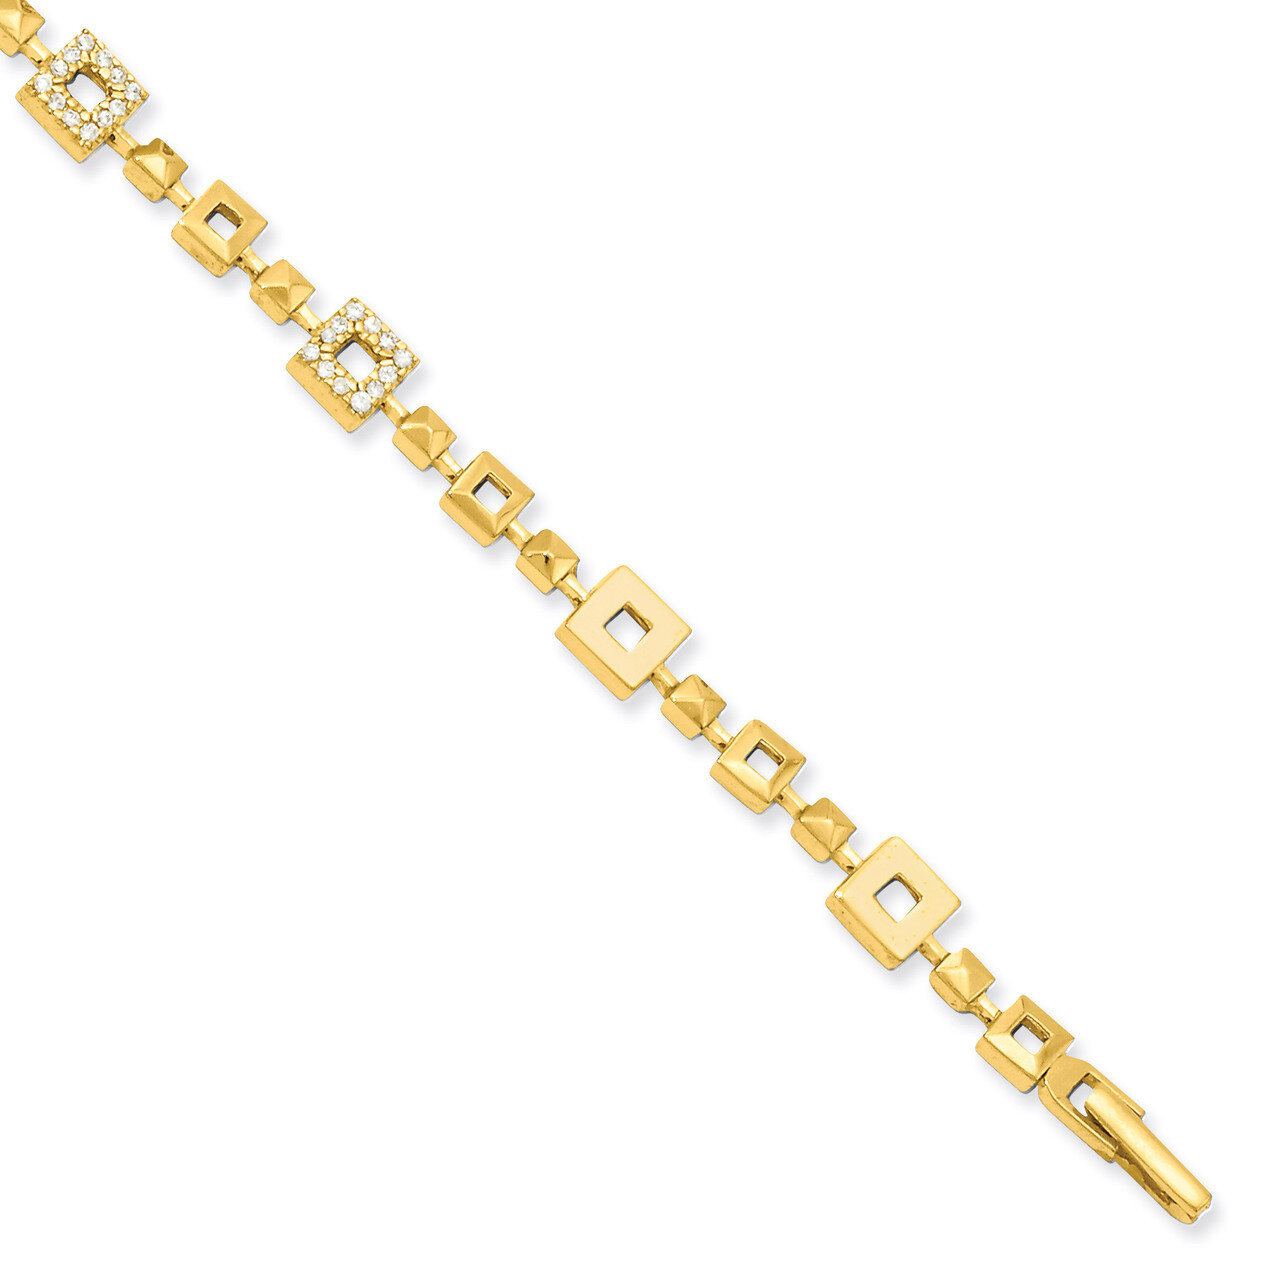 7in Gold-plated Squares Diamond Bracelet KW653-7